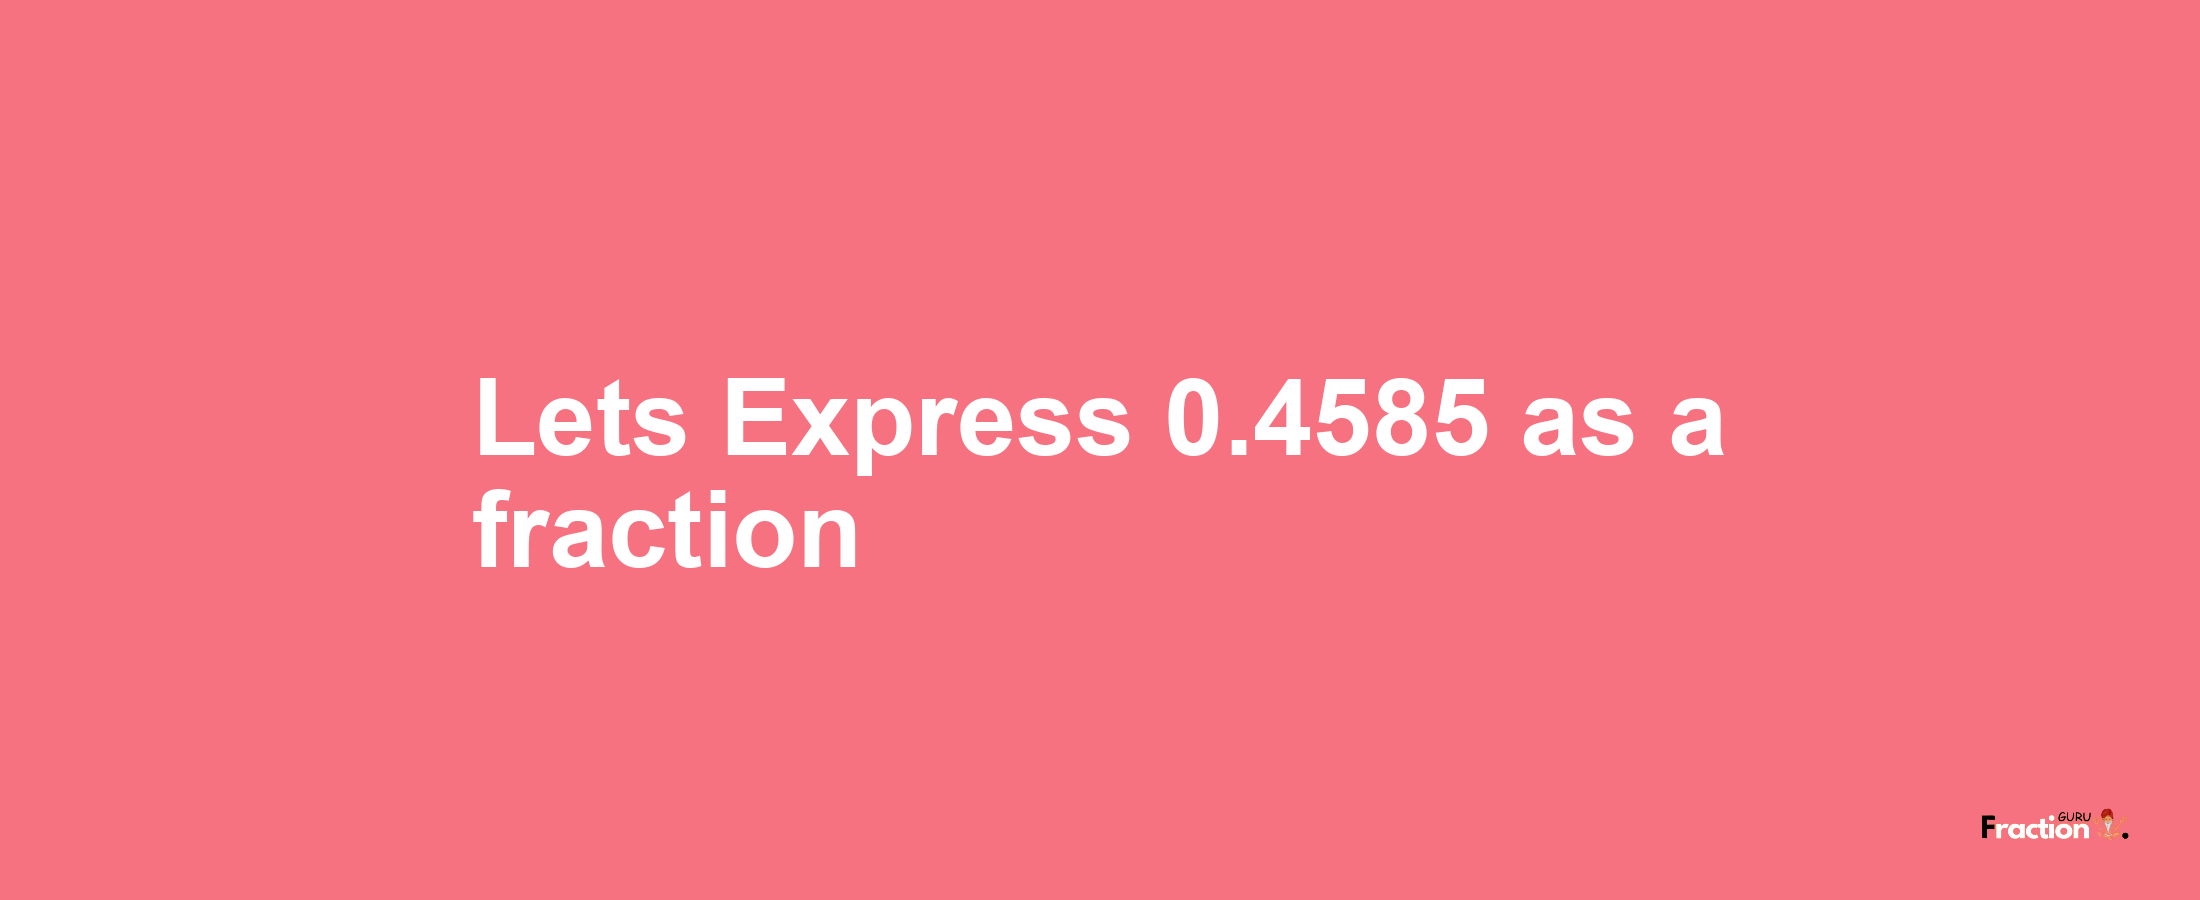 Lets Express 0.4585 as afraction